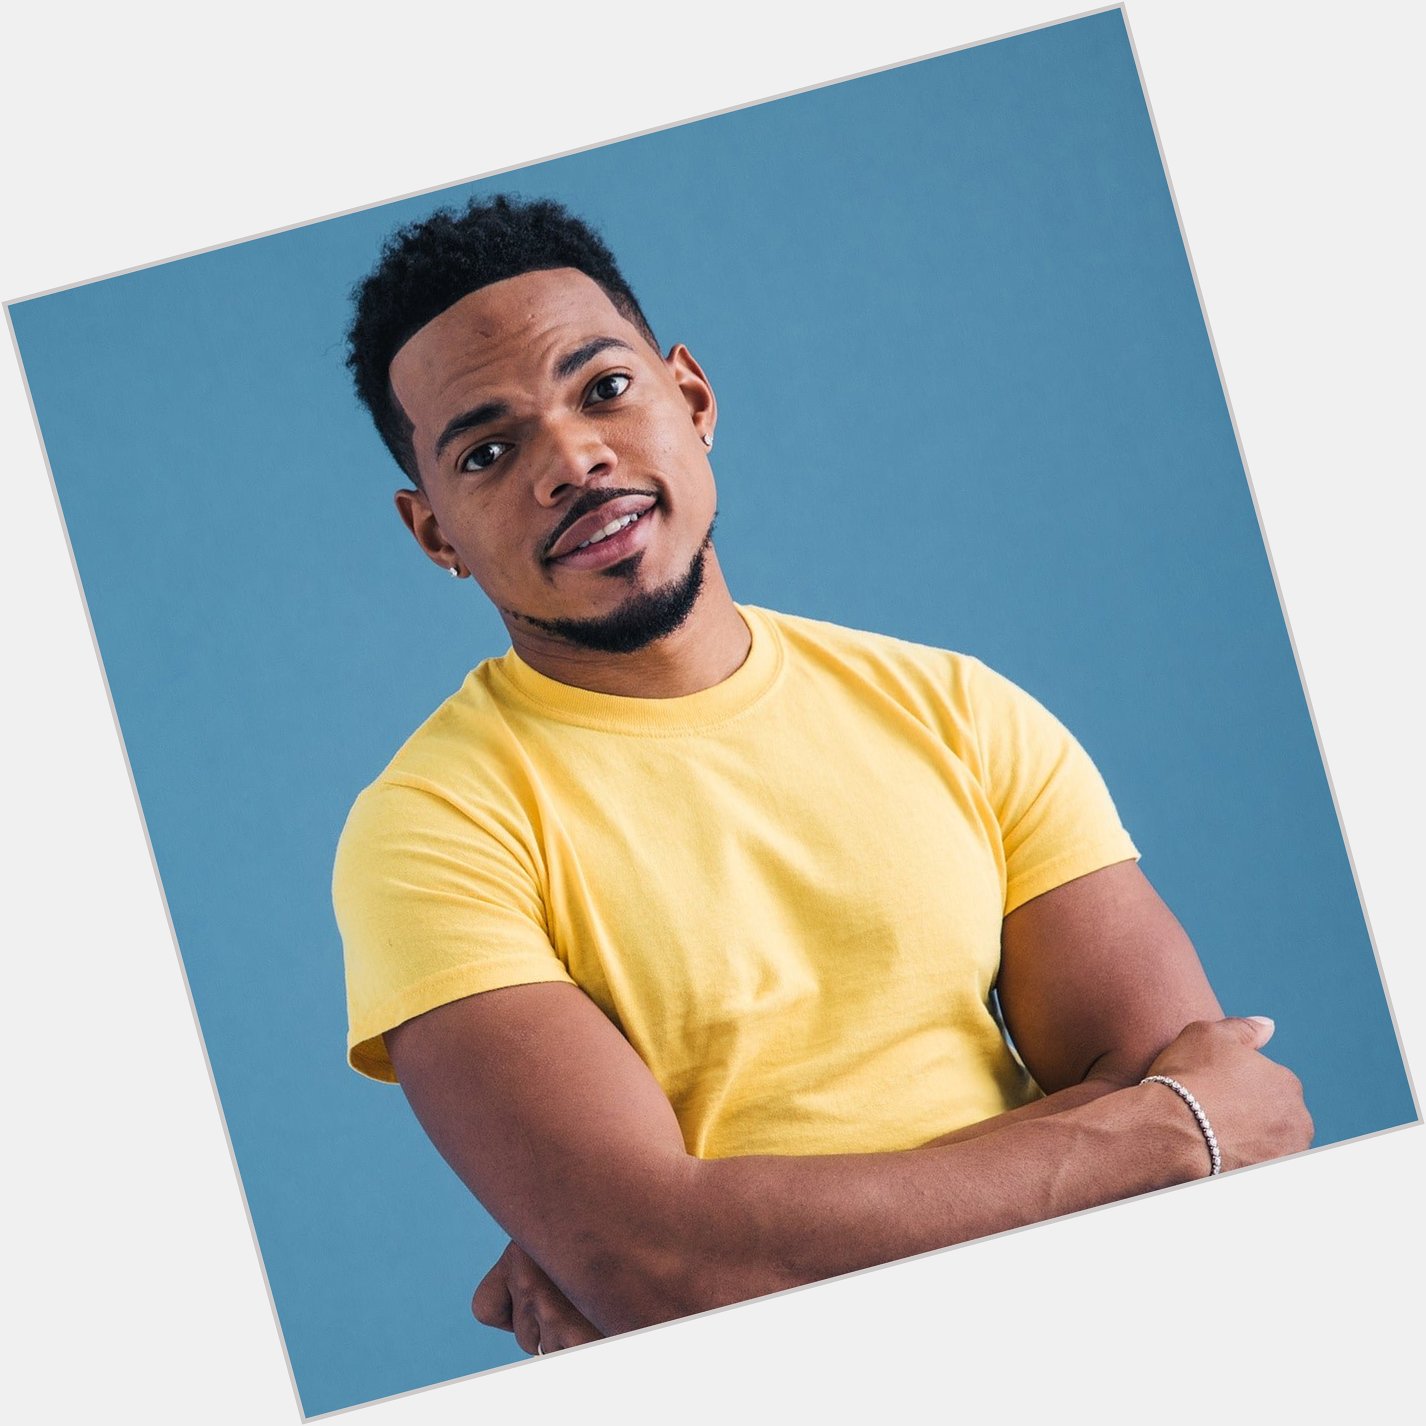 Happy Birthday, Chance the Rapper
For Disney, he voiced the Bush Baby in the 2019 version of 